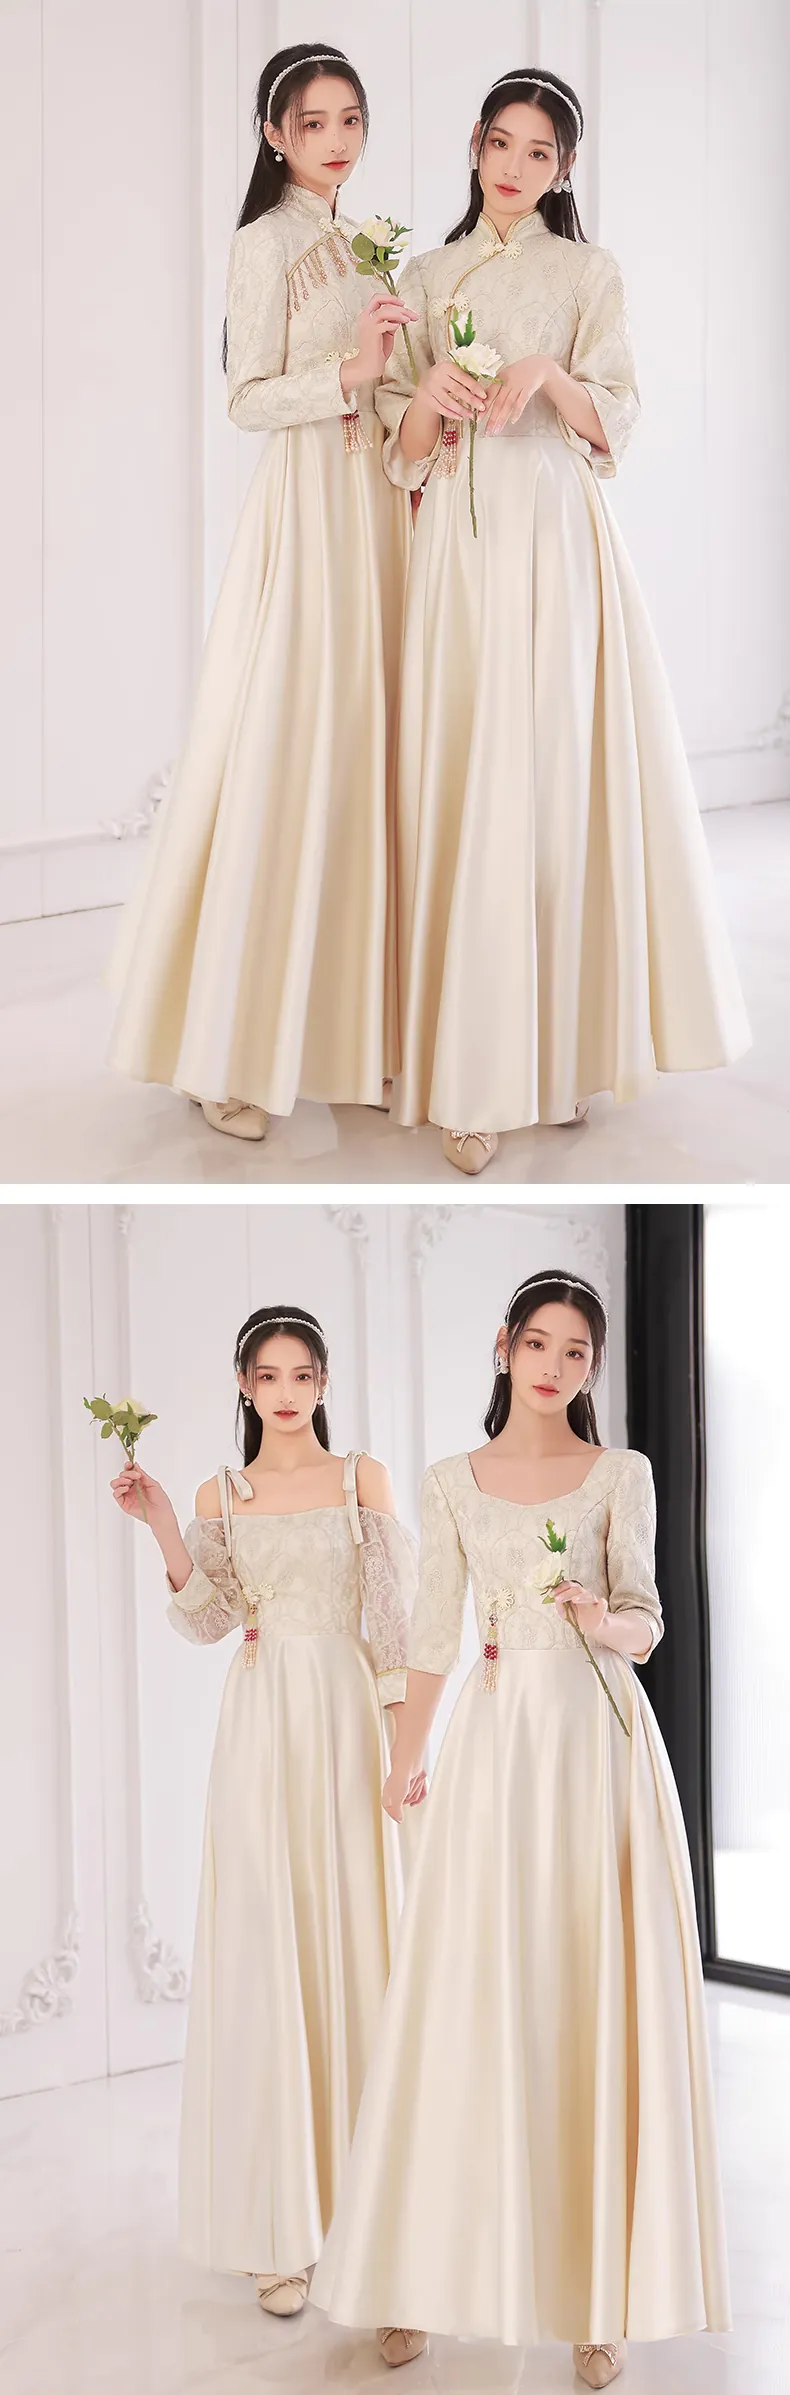 Retro-Fashion-Champagne-Maid-of-Honor-Bridal-Party-Evening-Dress12